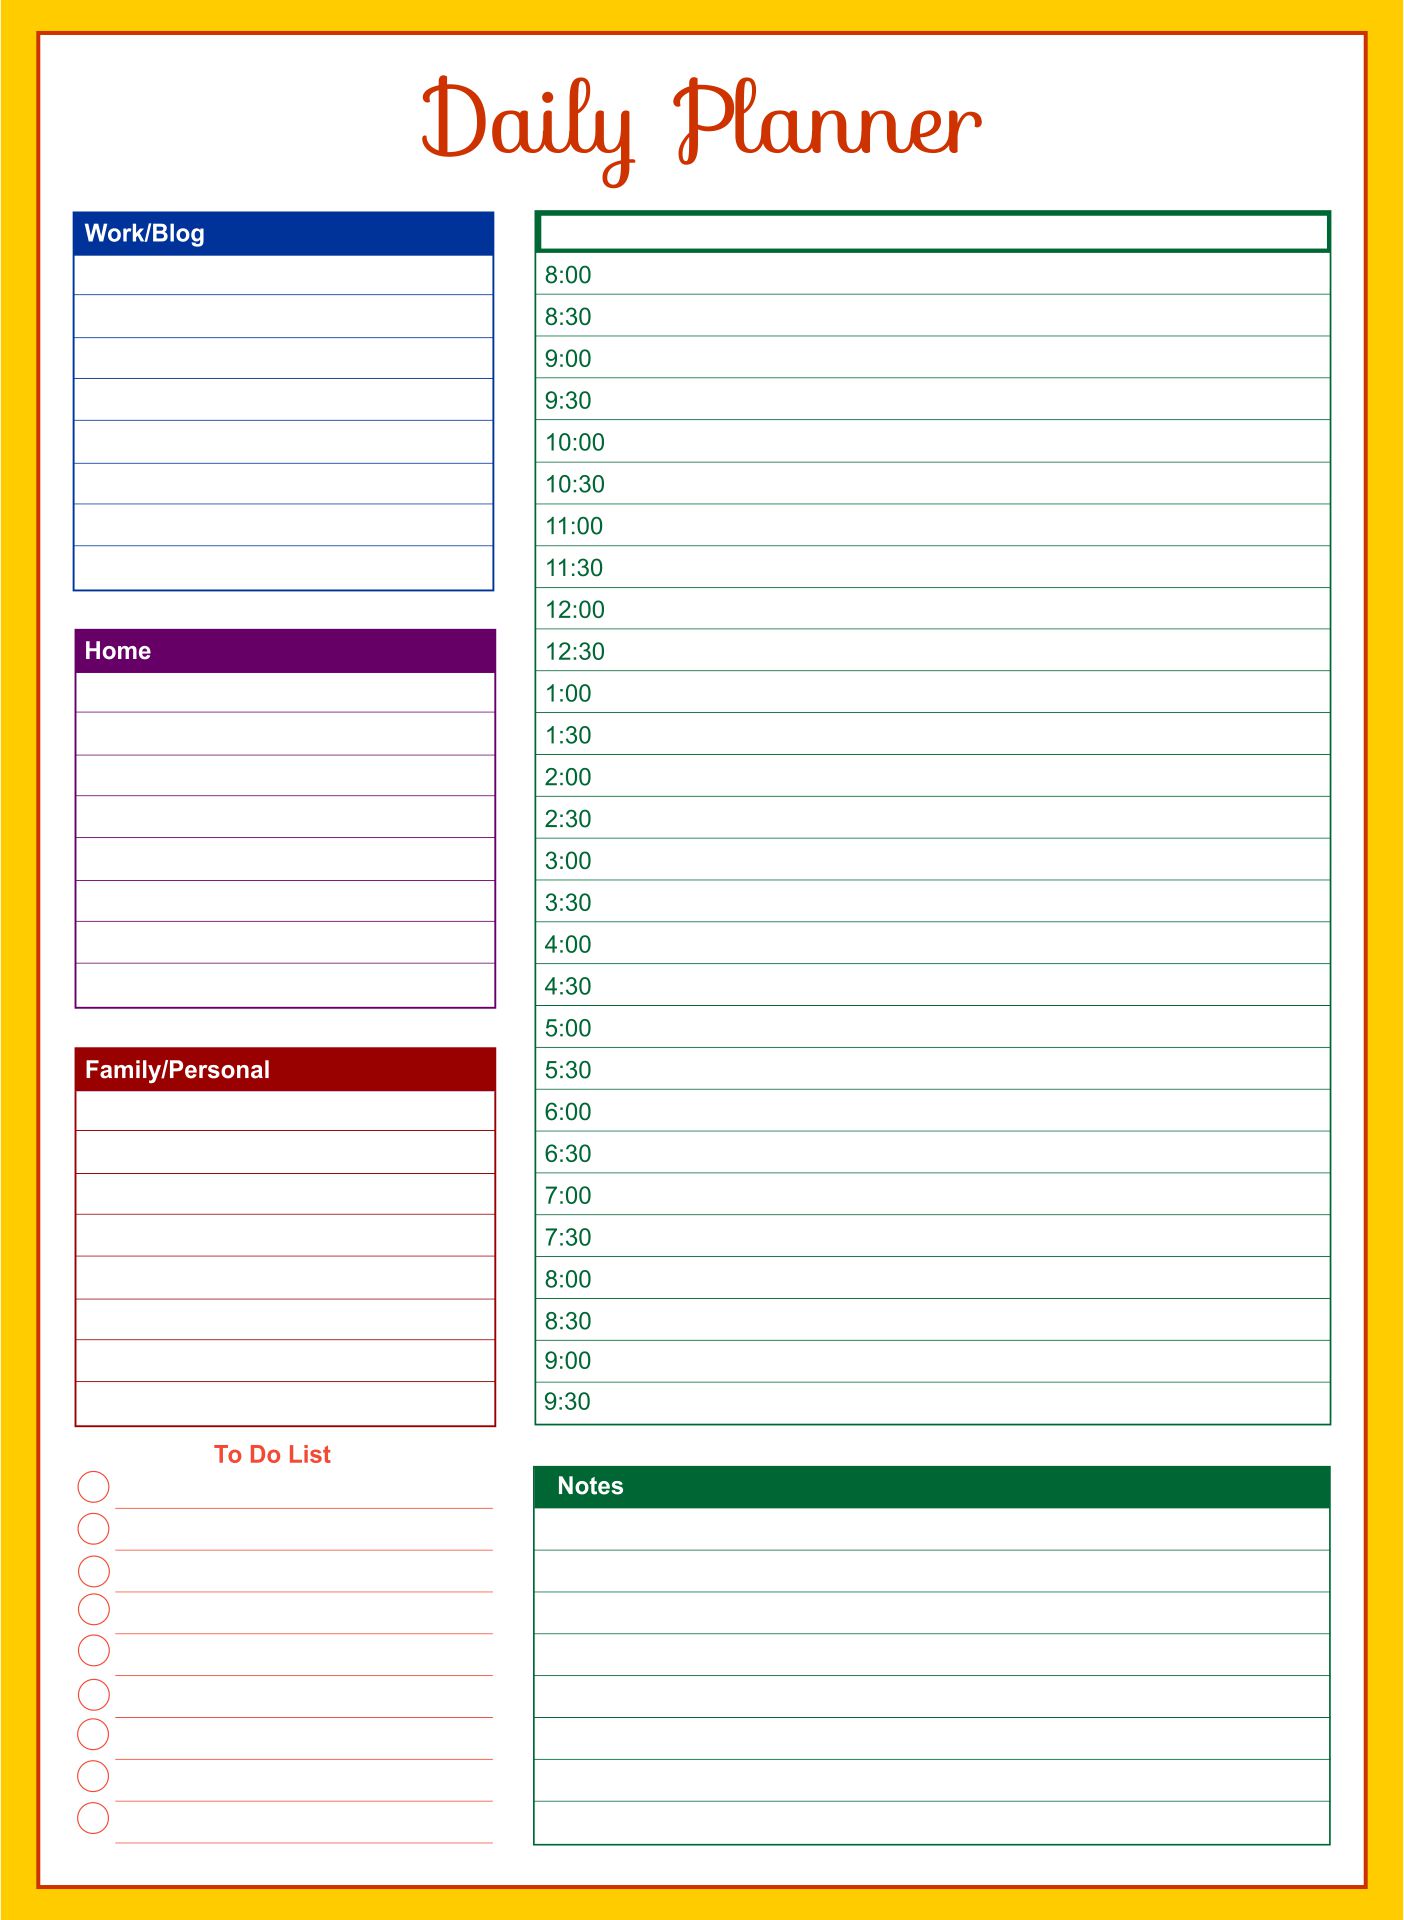 Printables Daily Planners Do Lists